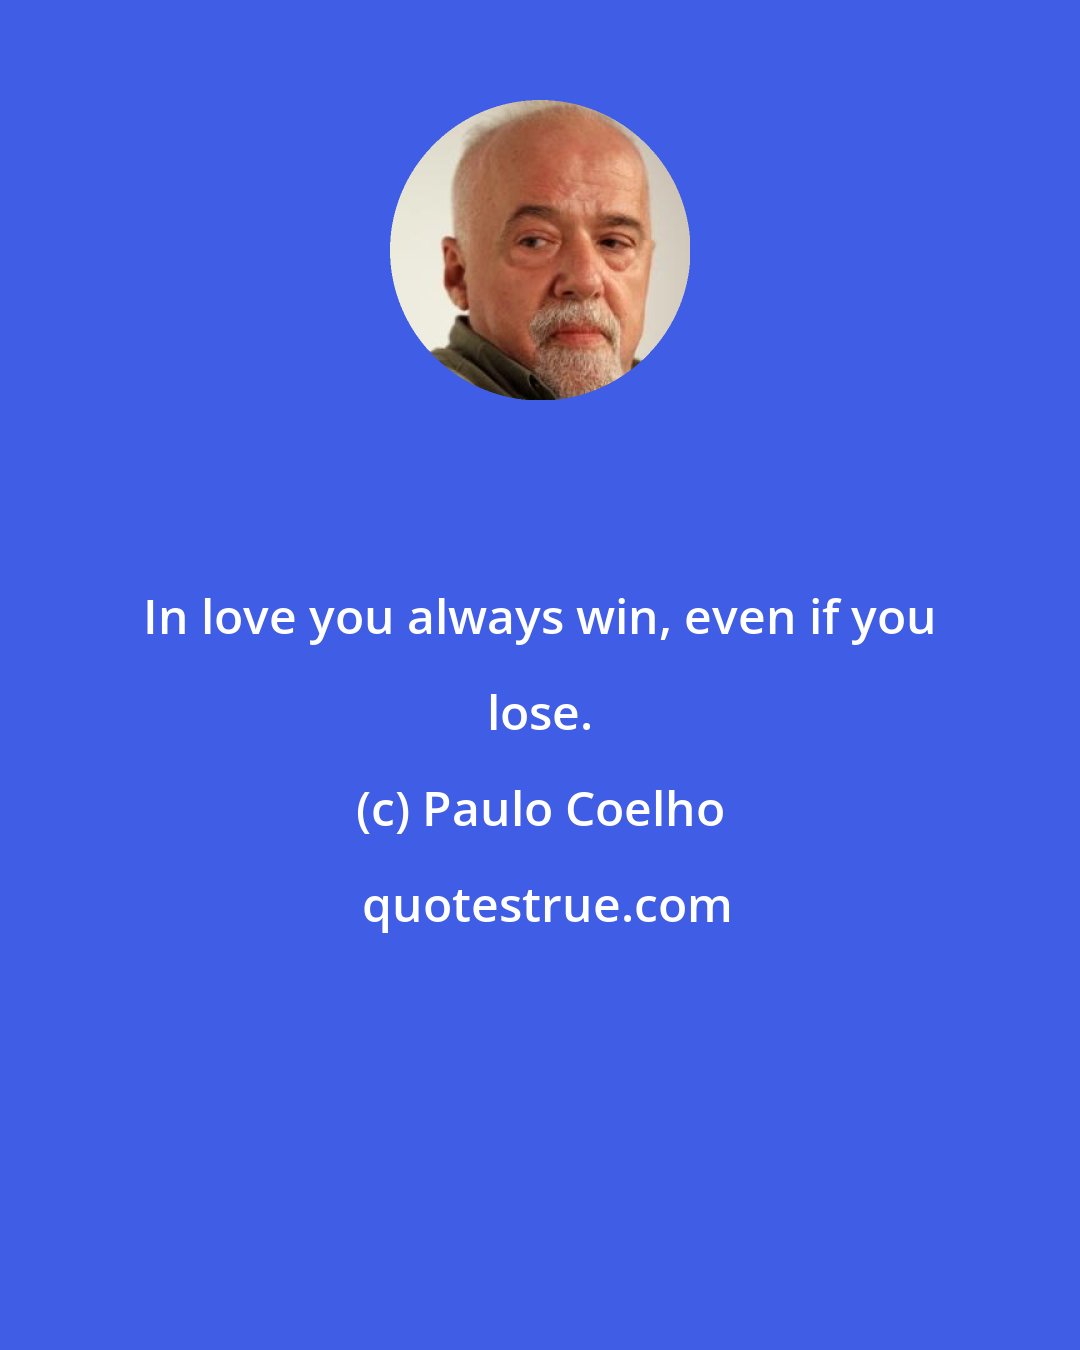 Paulo Coelho: In love you always win, even if you lose.